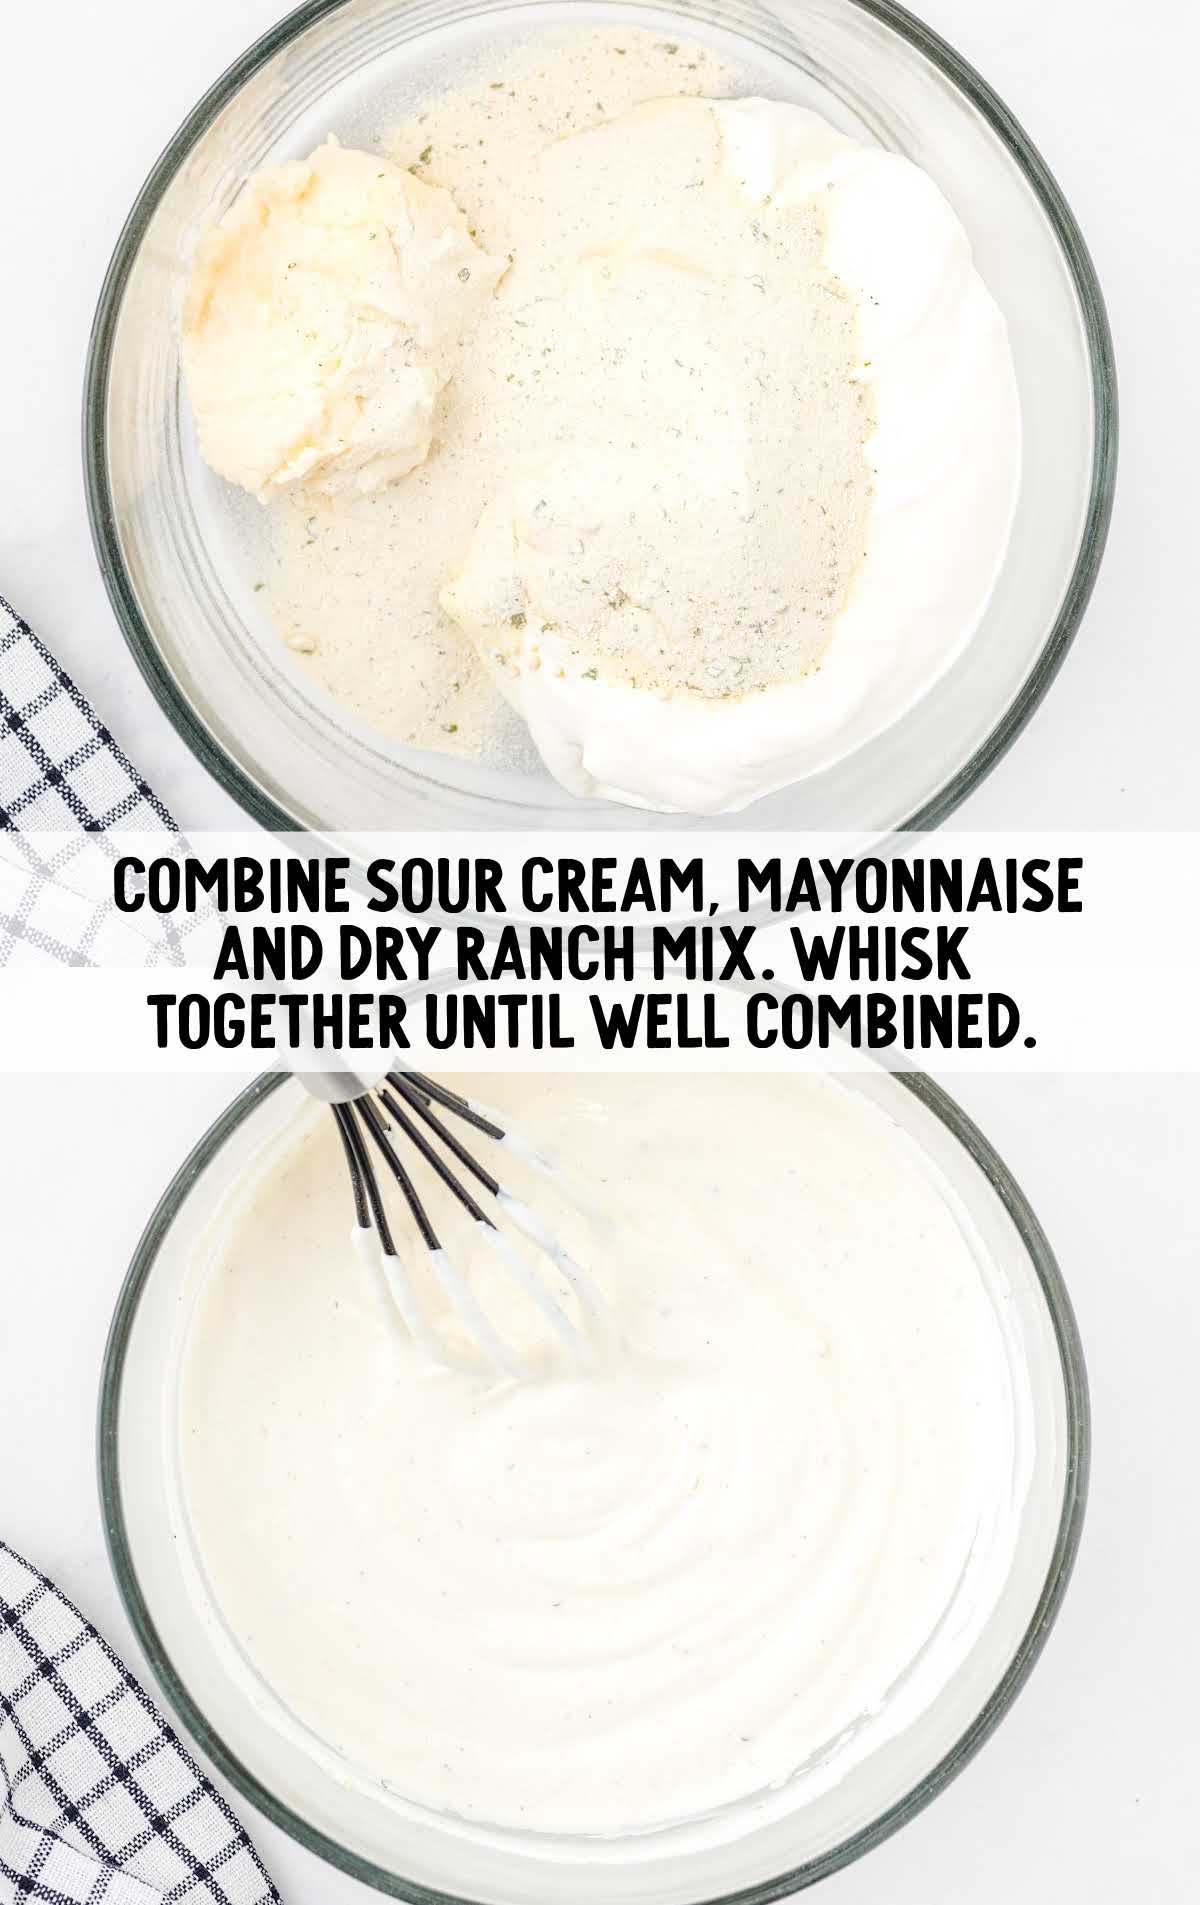 sour cream, mayonnaise and dry ingredients whisked together in a bowl